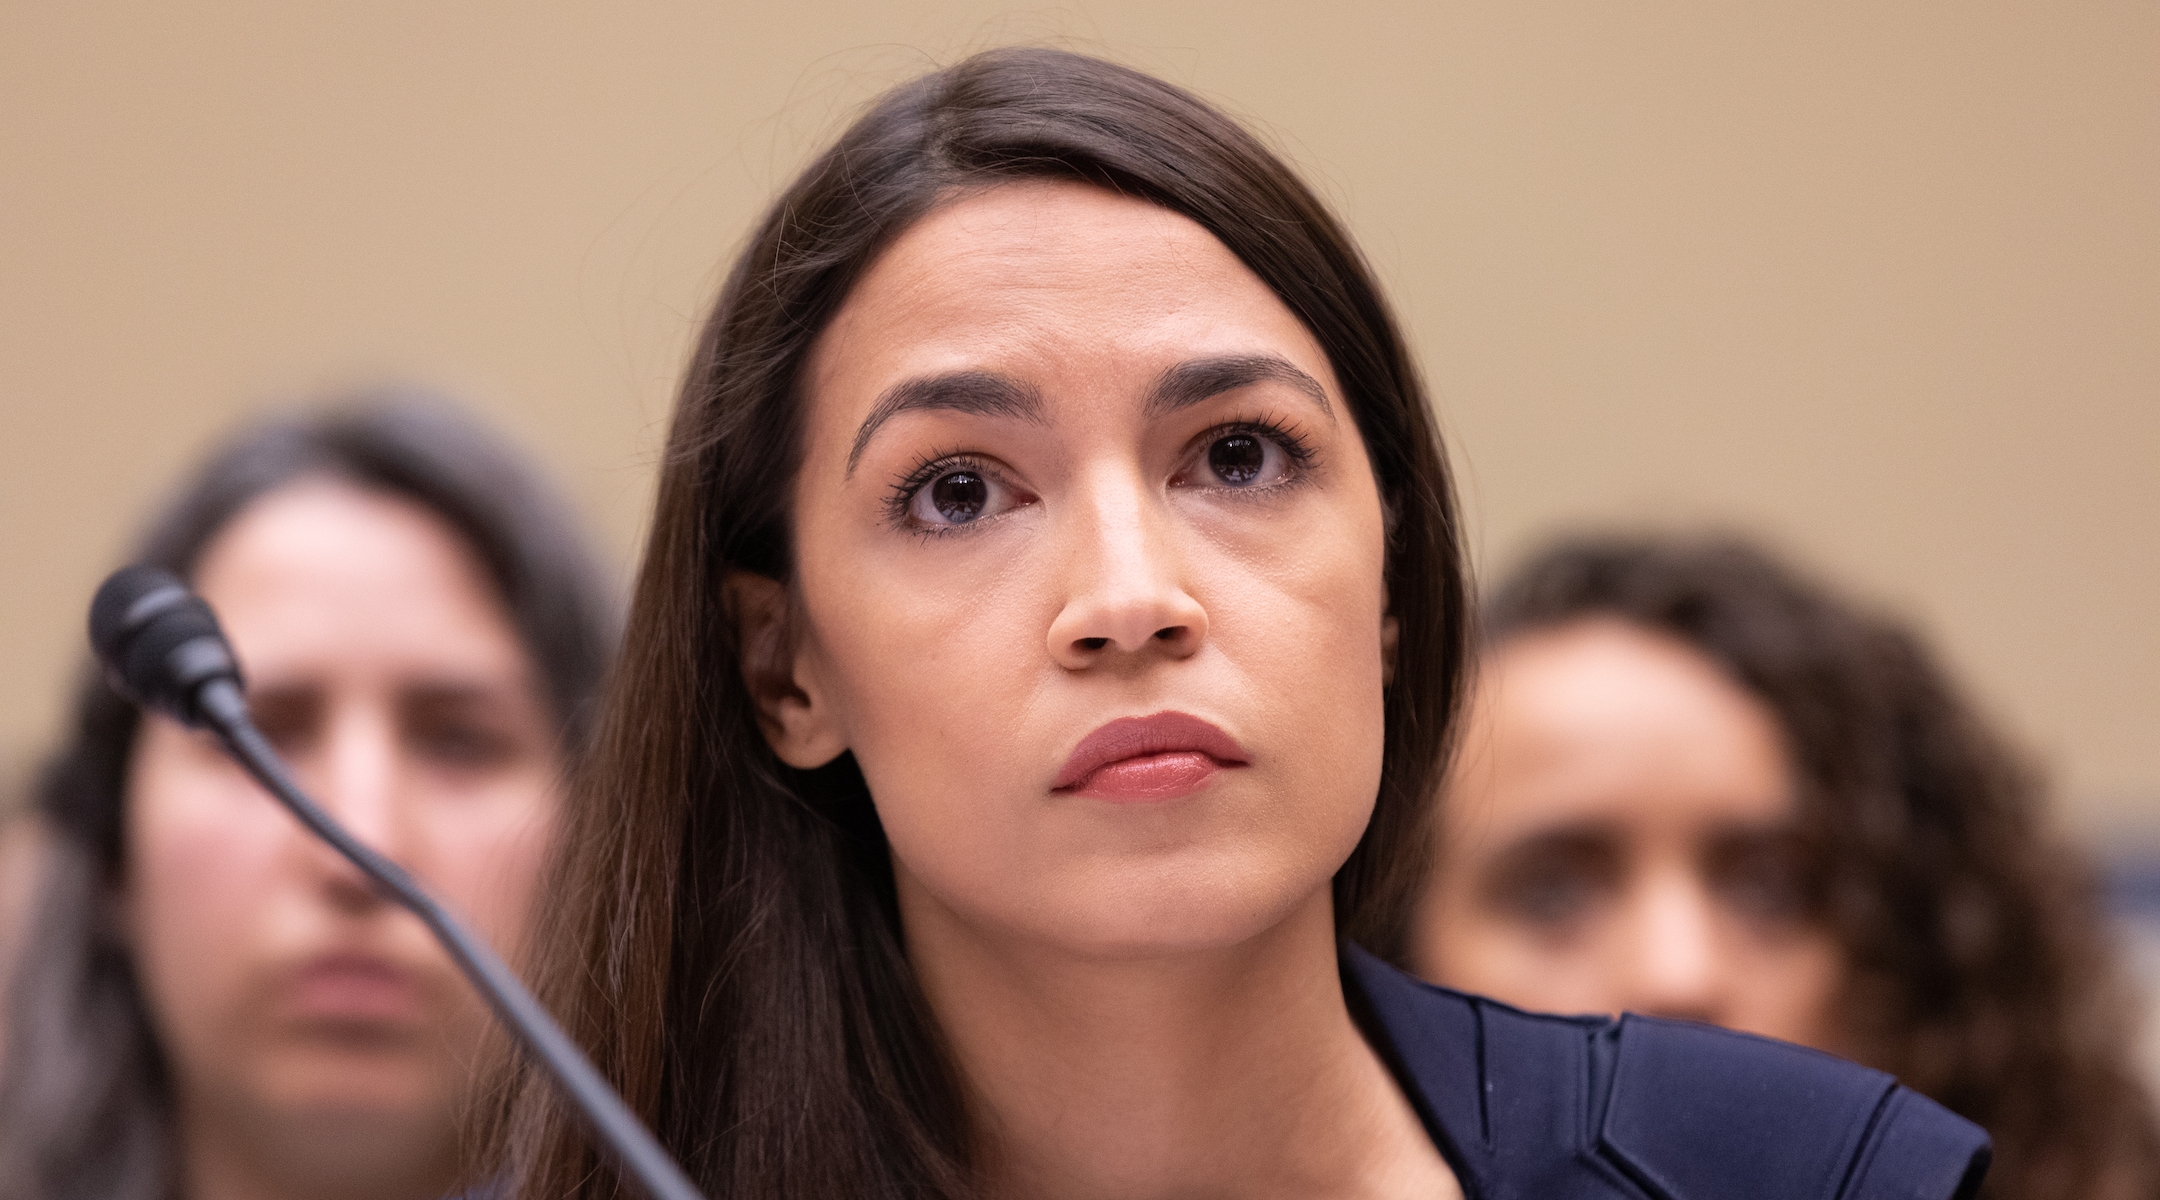 Alexandria Ocasio-Cortez at a House committee hearing, July 12, 2019. She said Dov Hikind had a “First Amendment right to express his views and should not be blocked for them.” (Aurora Samperio/NurPhoto via Getty Images)